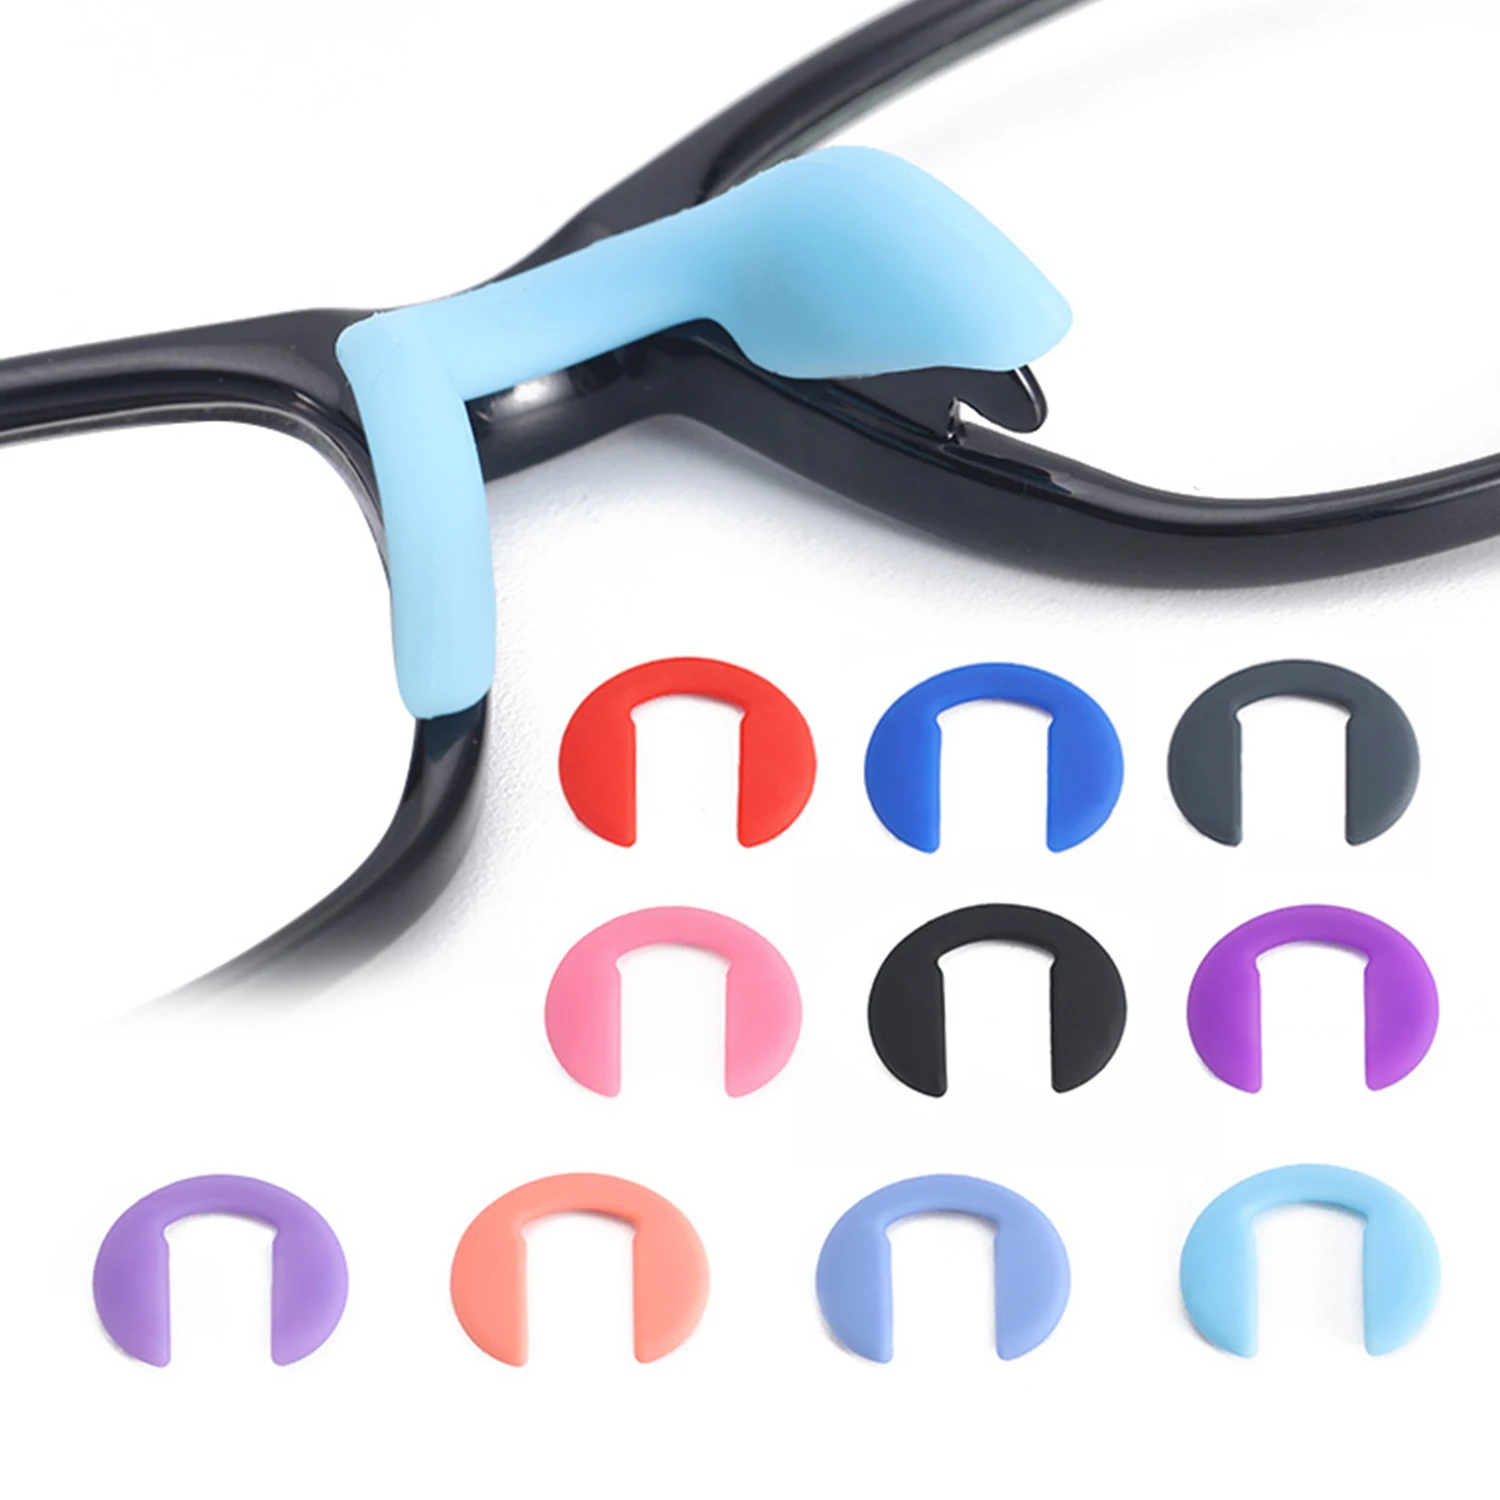 

Colored U Silicone Conjoined Siamese Saddle Eyeglass Soft Nose Pads for Insert On Glasses Translucent Anti-Slip Nose Pad